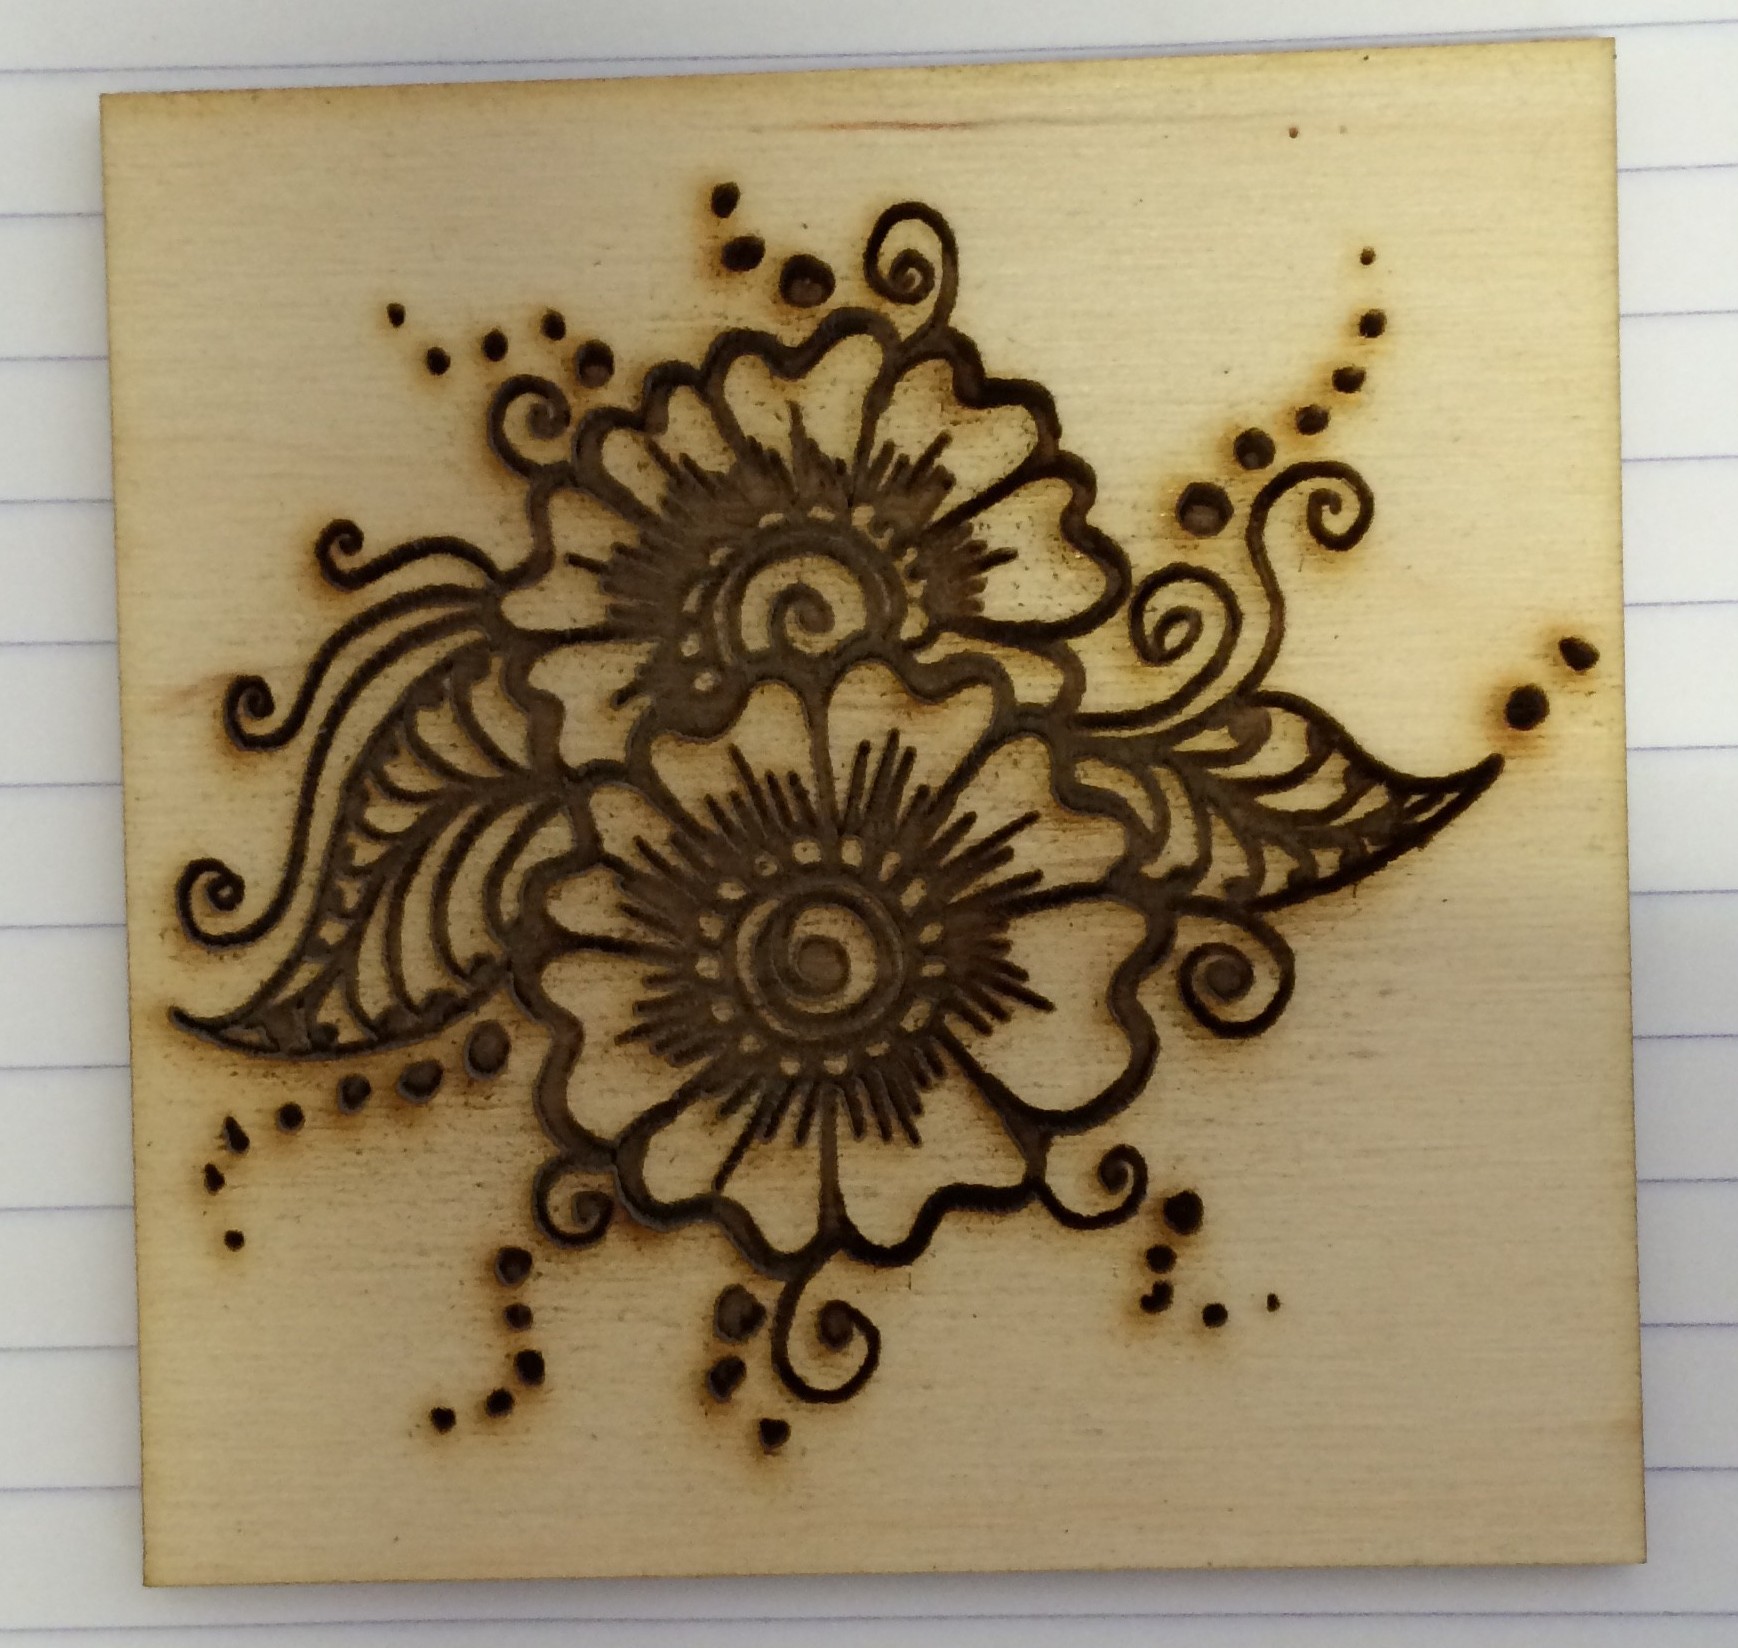 Henna pattern engraved on plywood